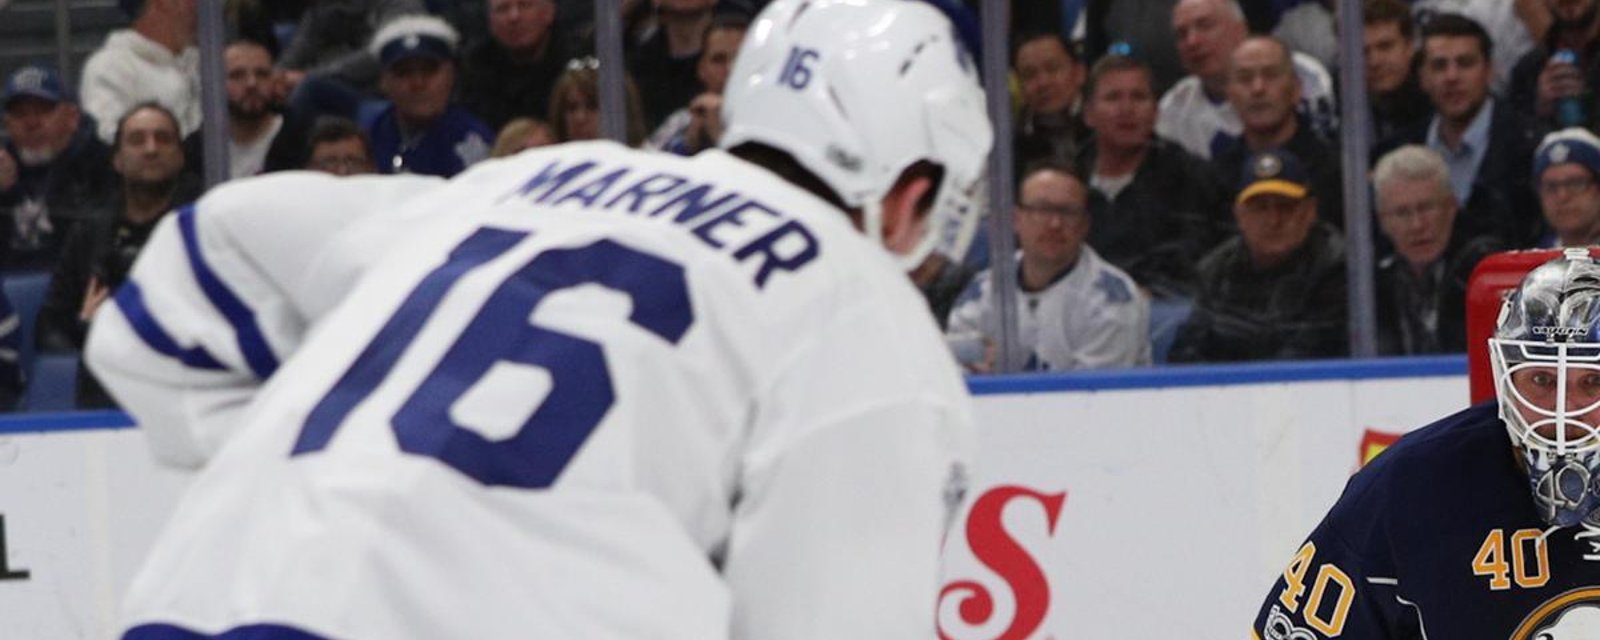 Rumor: Marner on his way to Eastern rival?